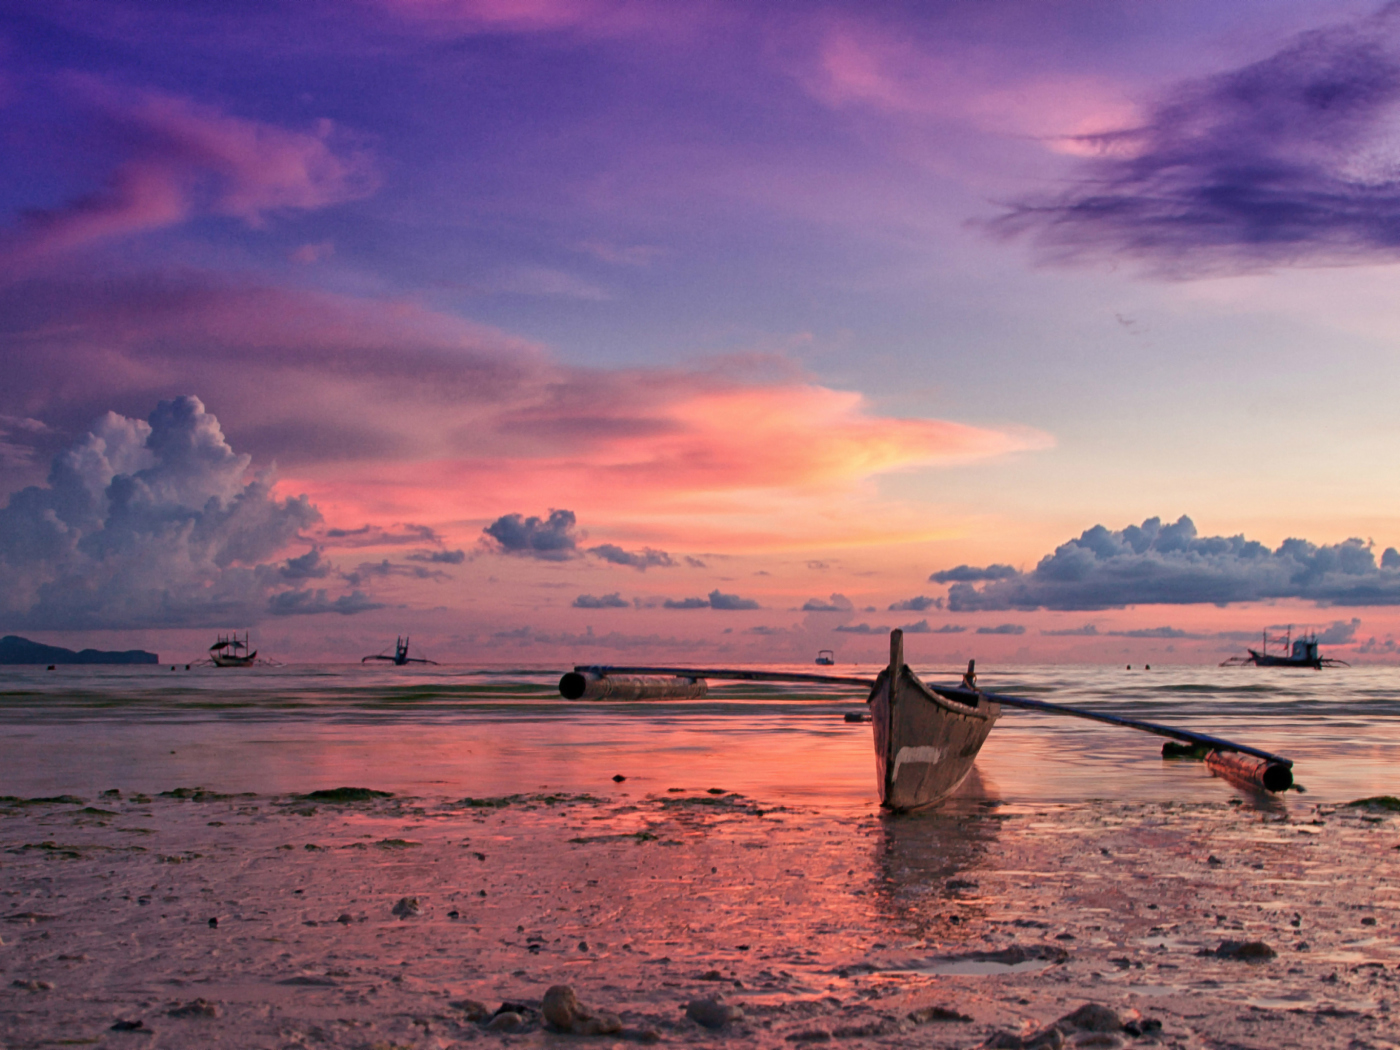 Das Pink Sunset And Boat At Beach In Philippines Wallpaper 1400x1050